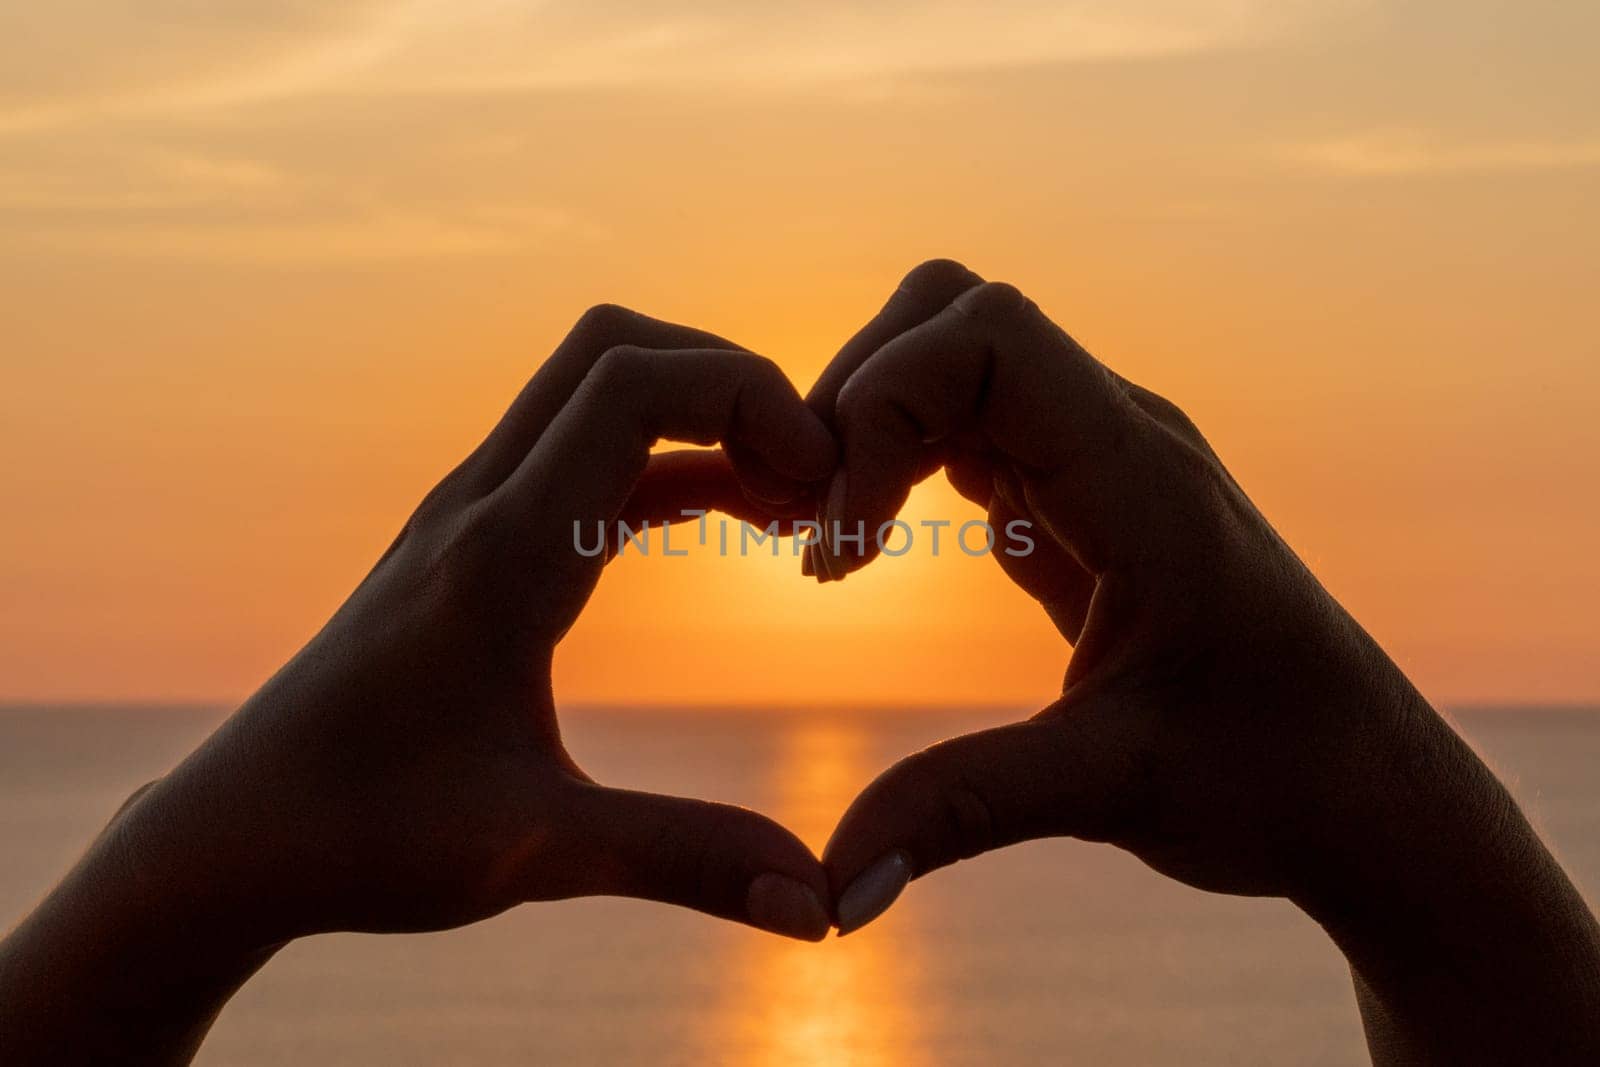 Hands heart sea sanset. The image features a beautiful sunset with two people holding their hands up in the air, forming a heart shape. by Matiunina